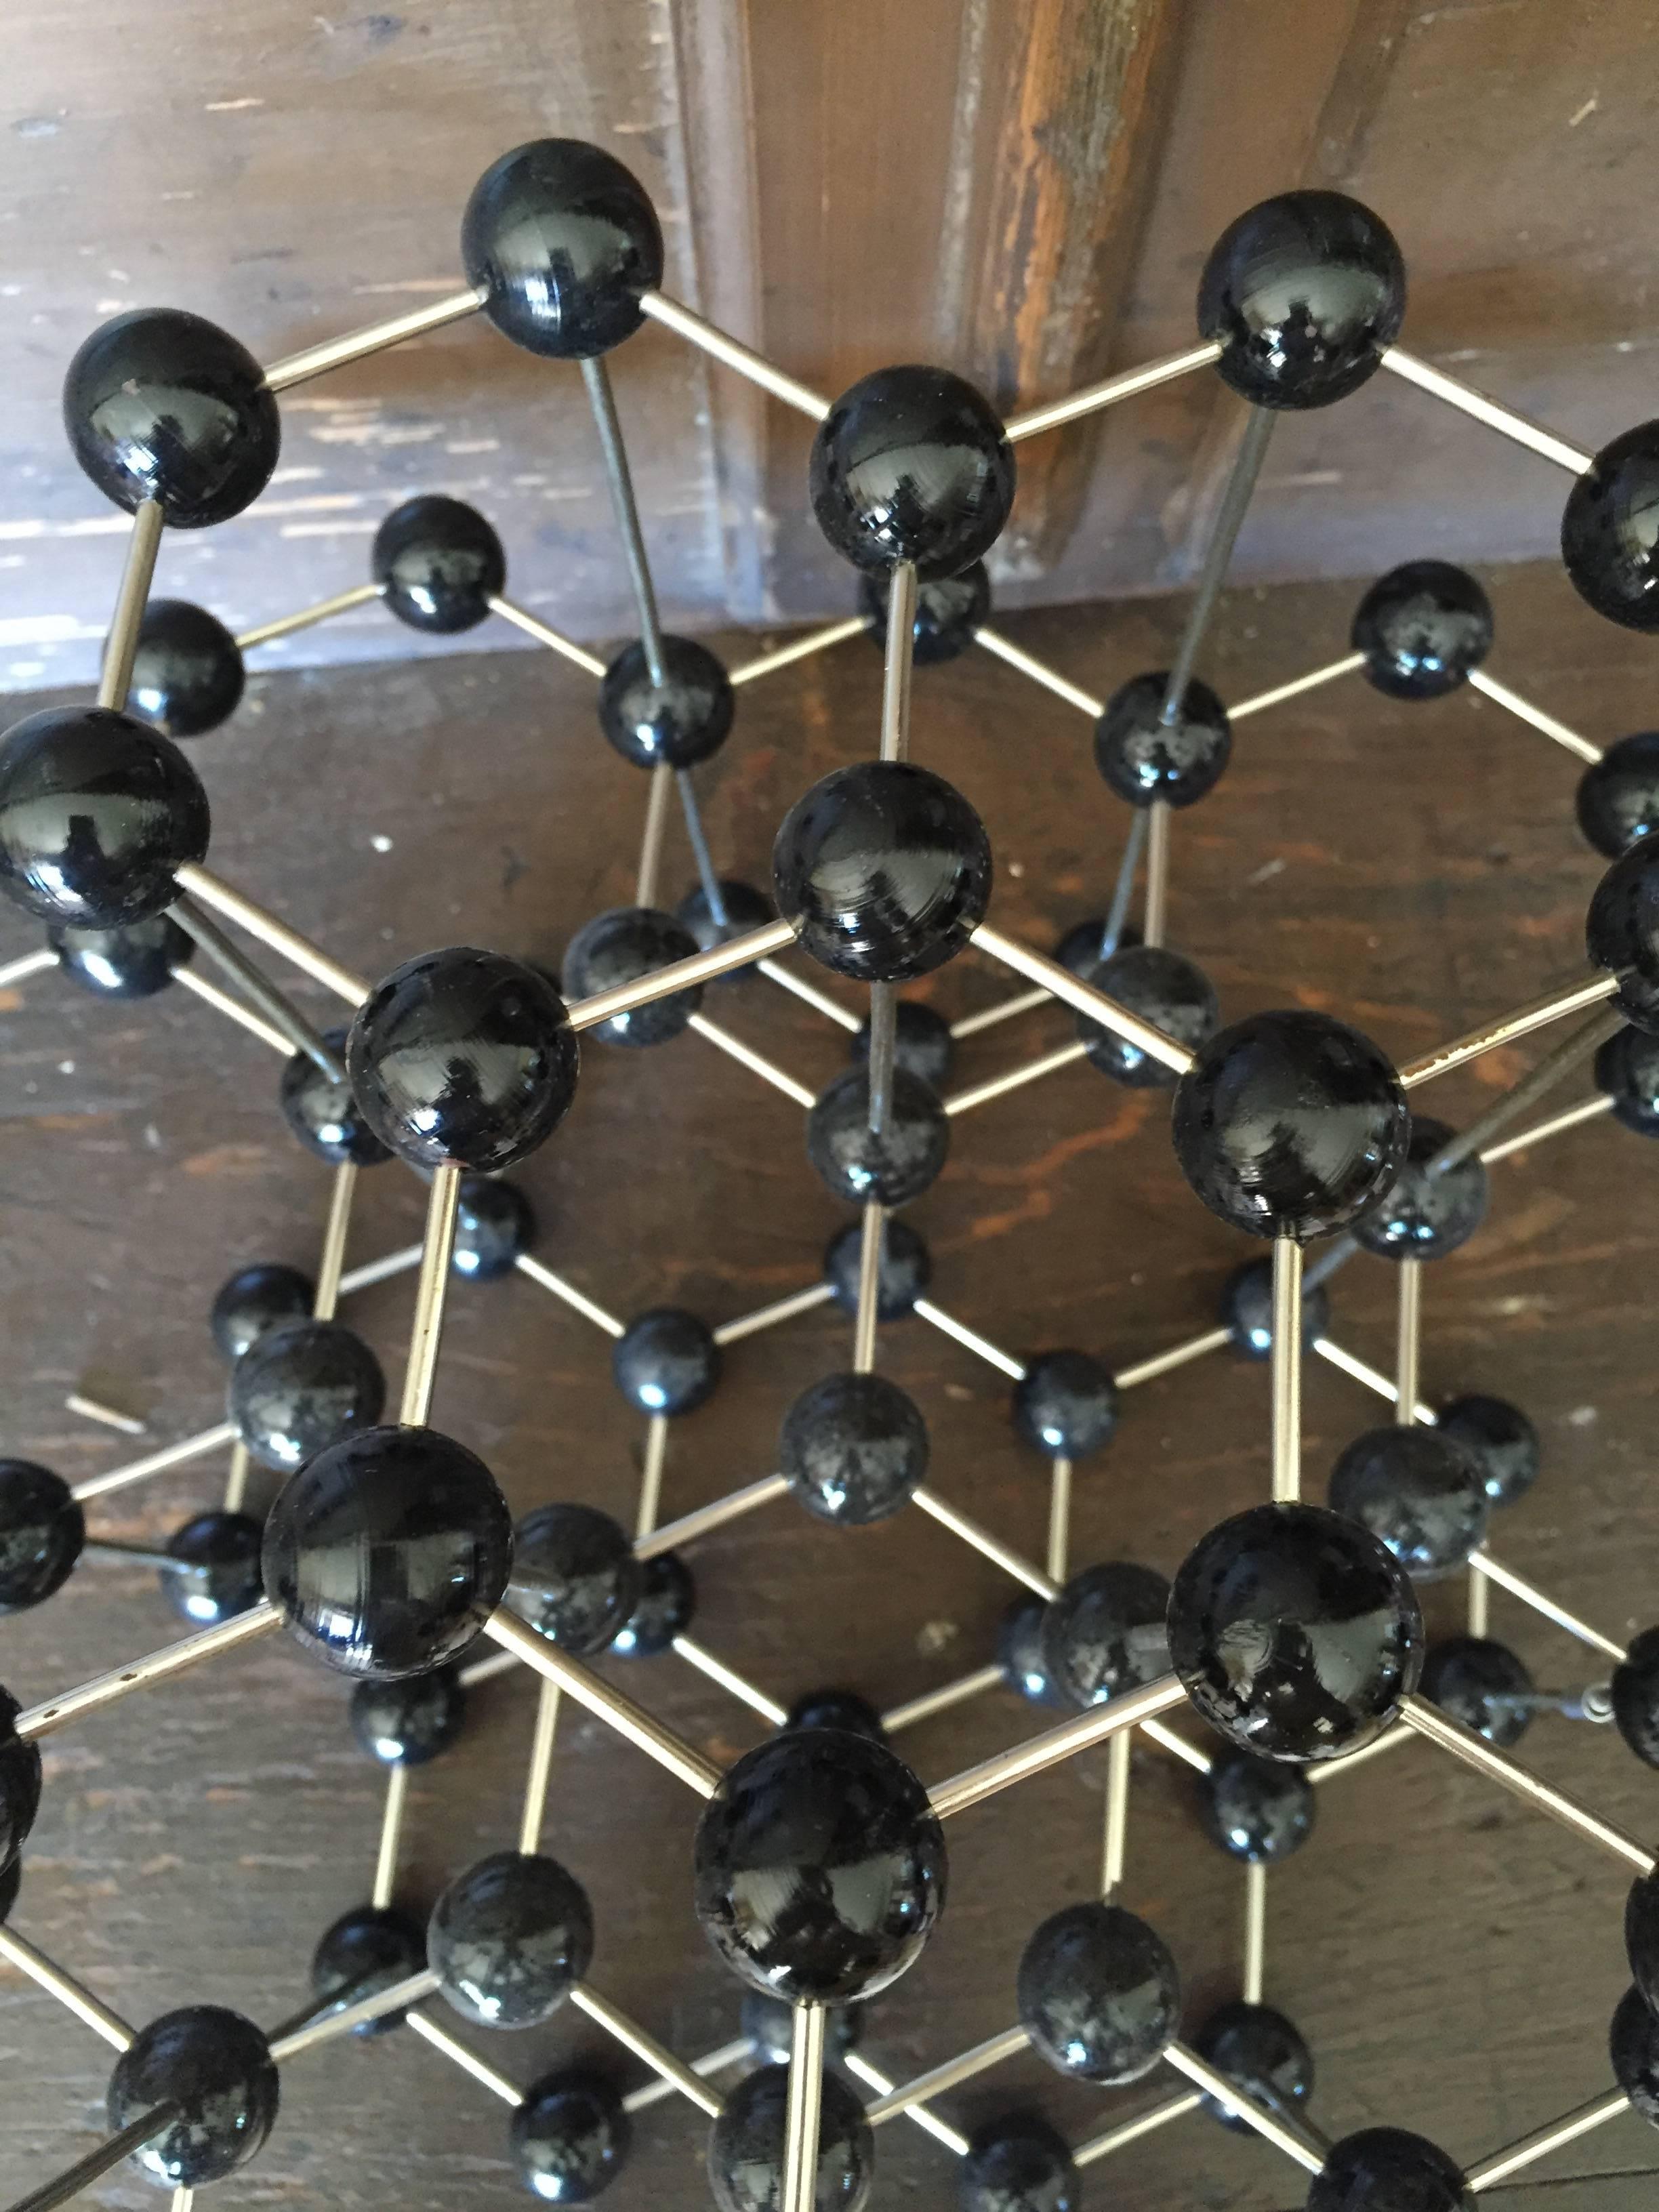 Vintage ball and stick molecular model depicting elemental structure of graphite, circa 1950s.